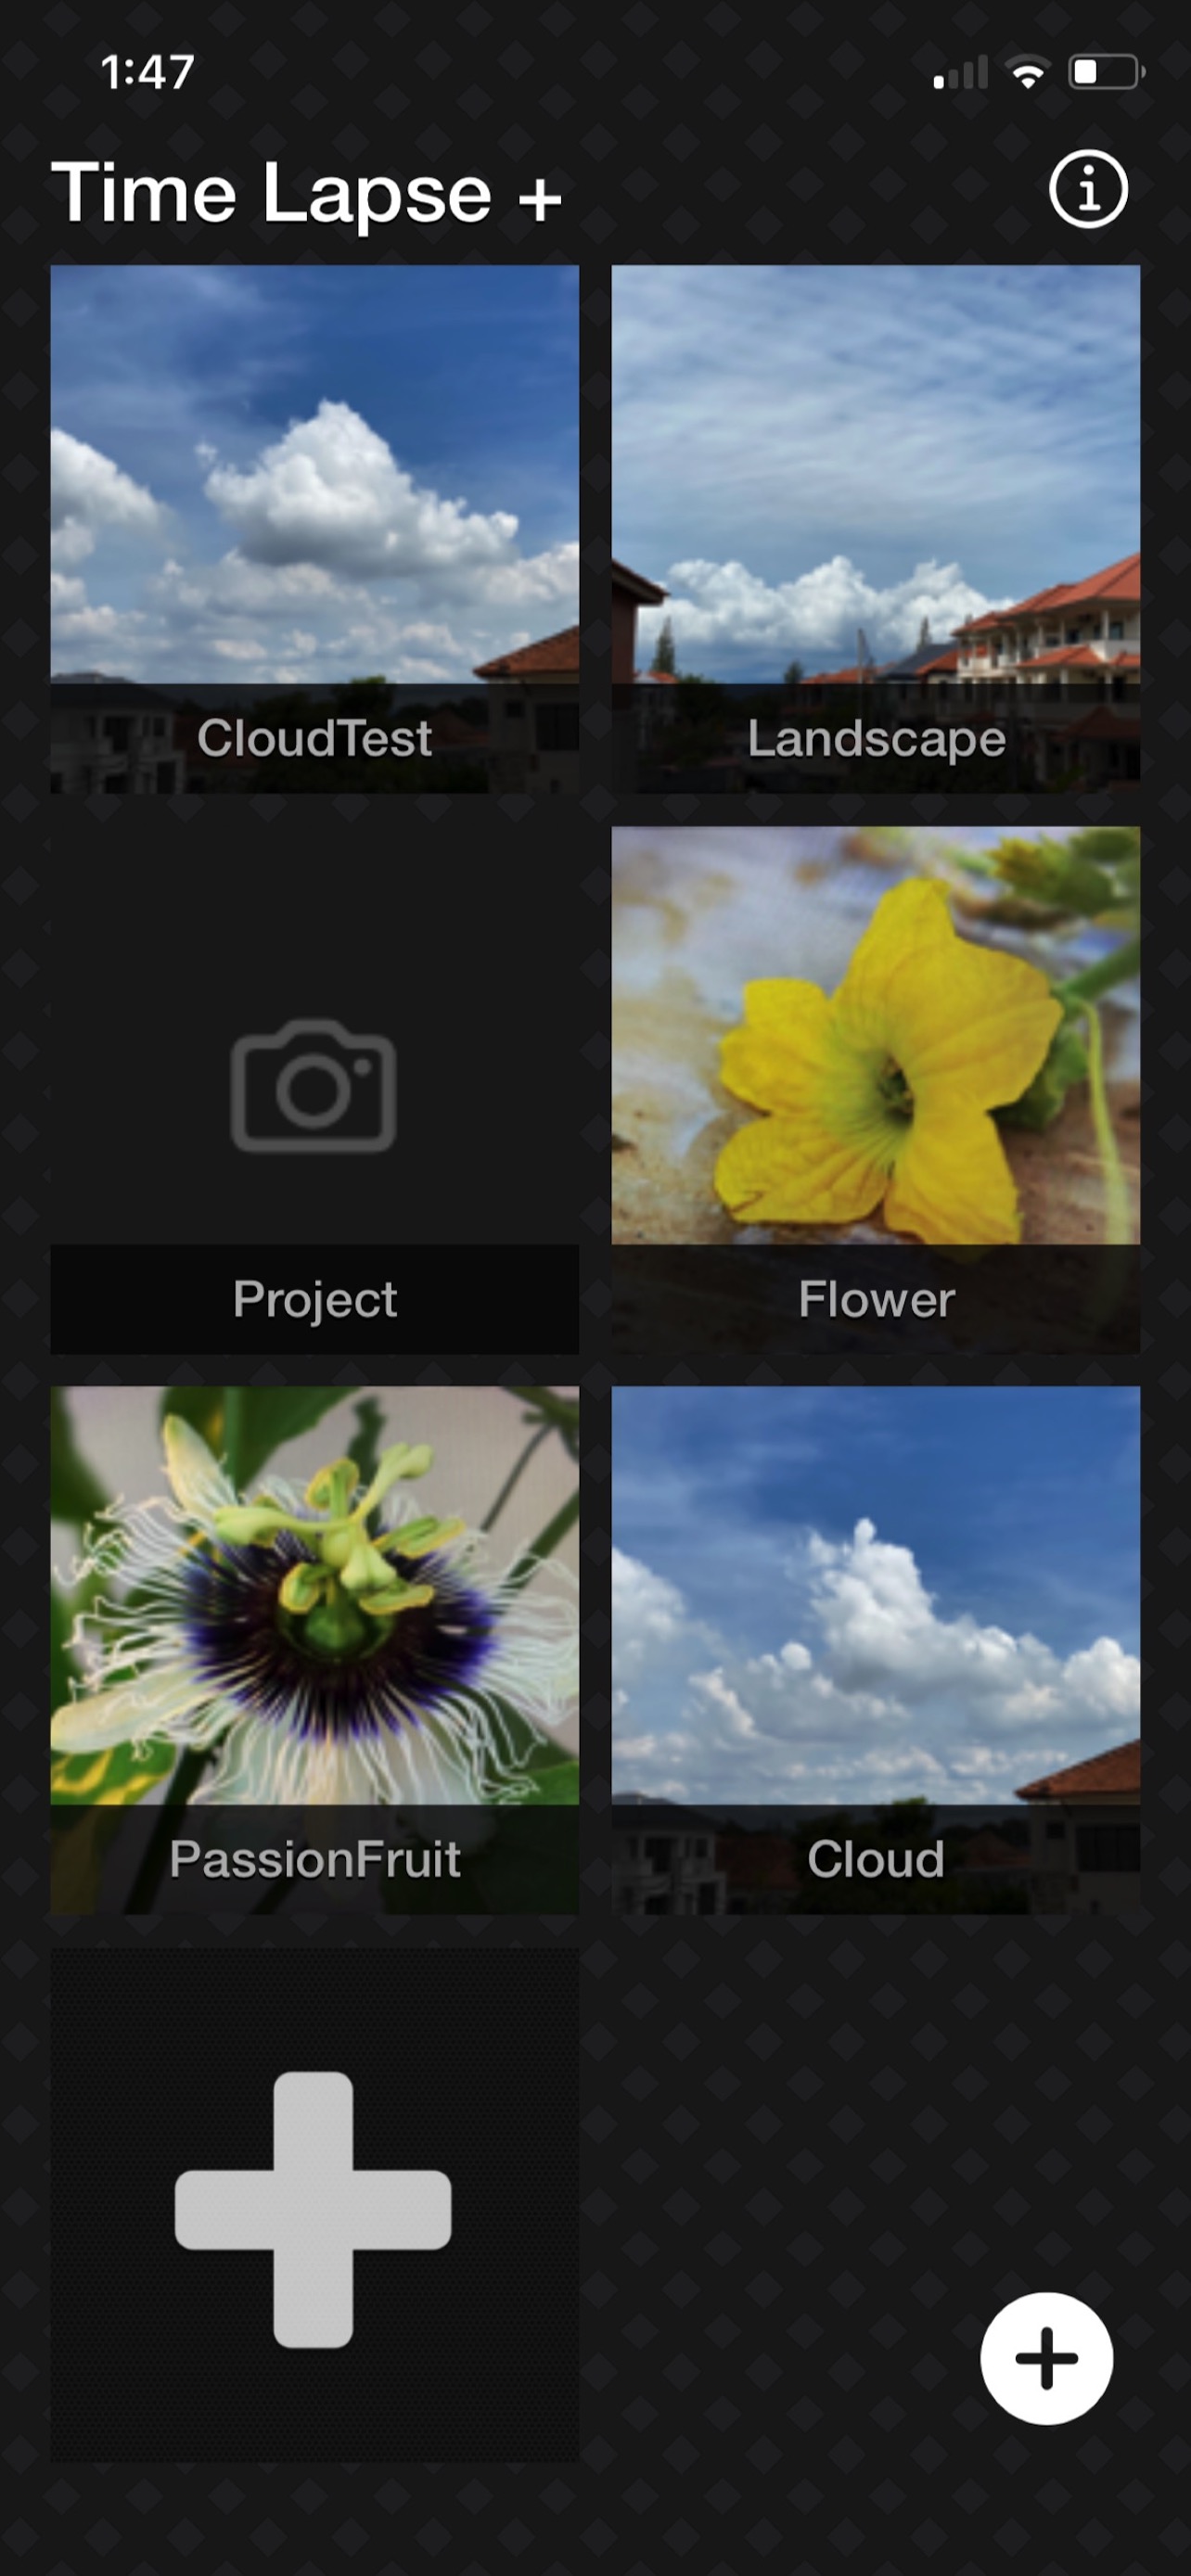 Time Lapse Plus iOS App for iPhone and iPad